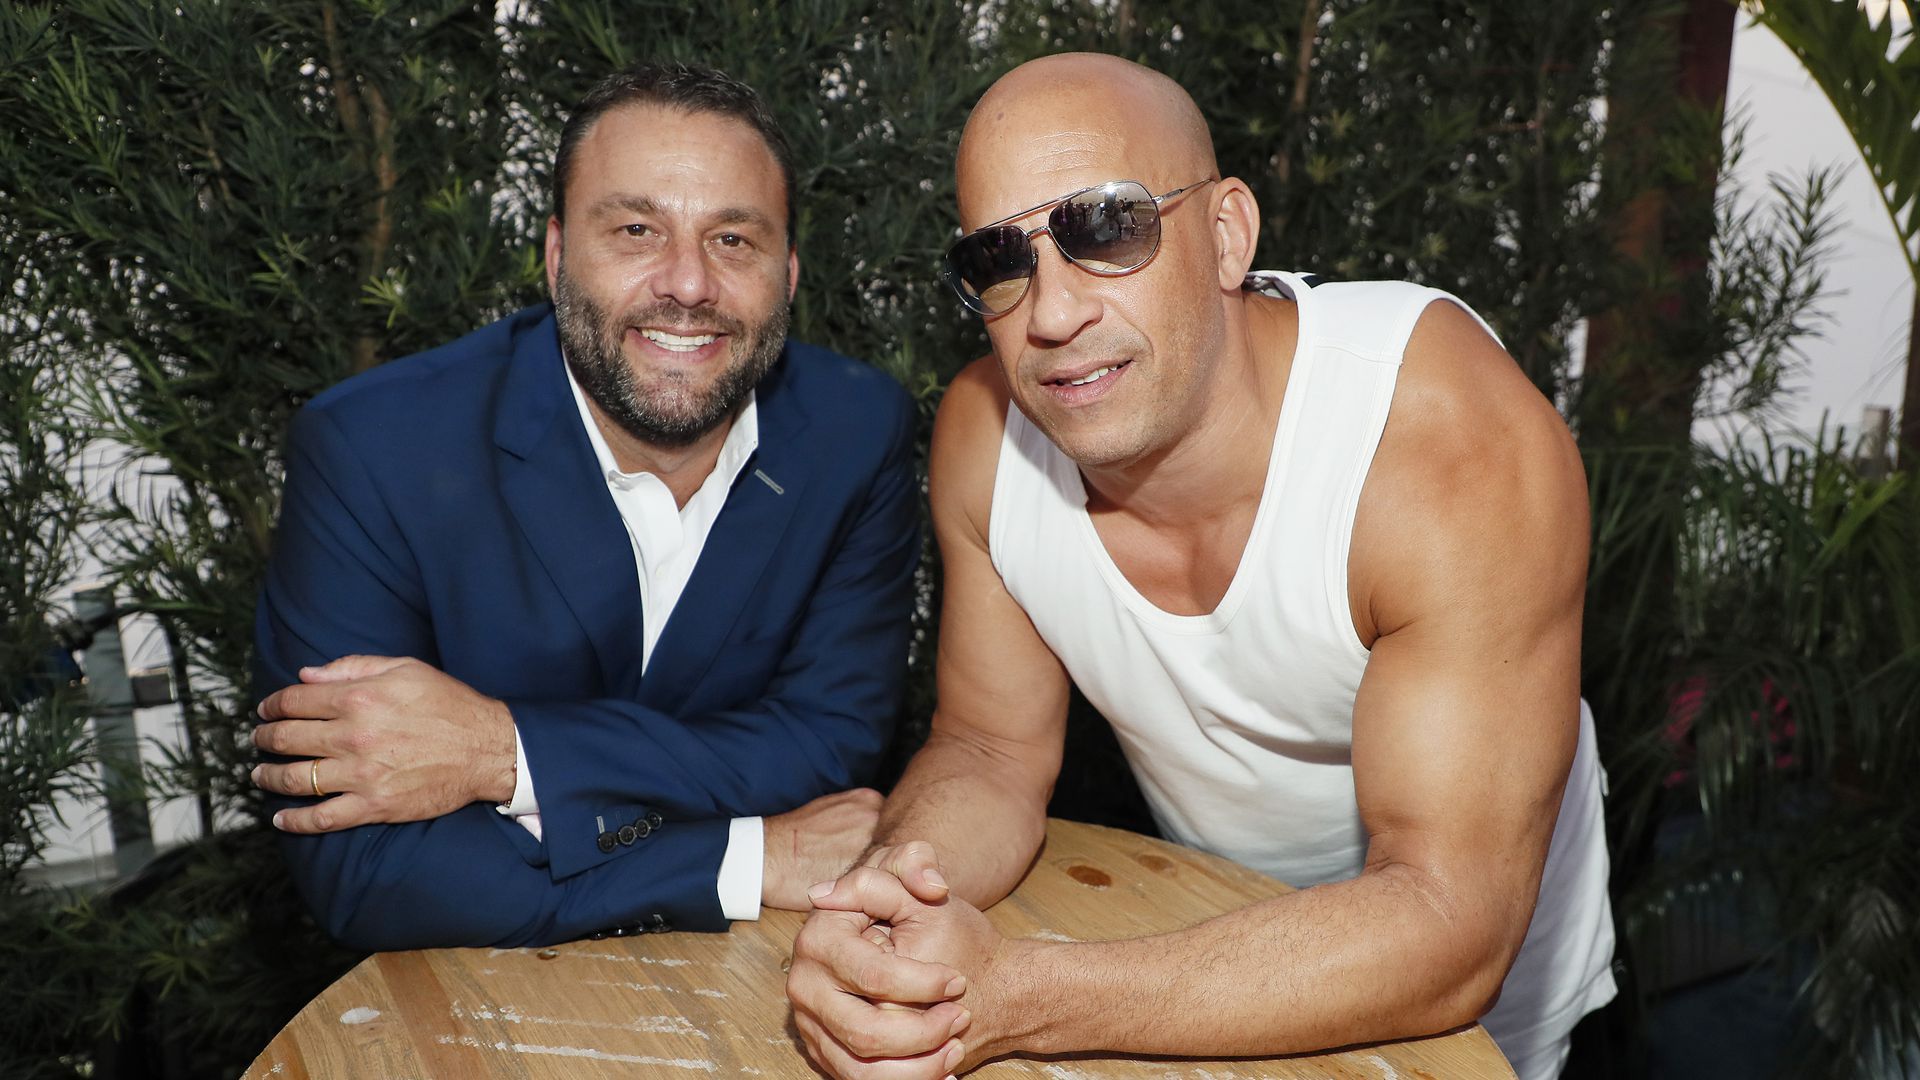 David Grutman poses wearing a blue suit with Vin Diesel in a white tank top.